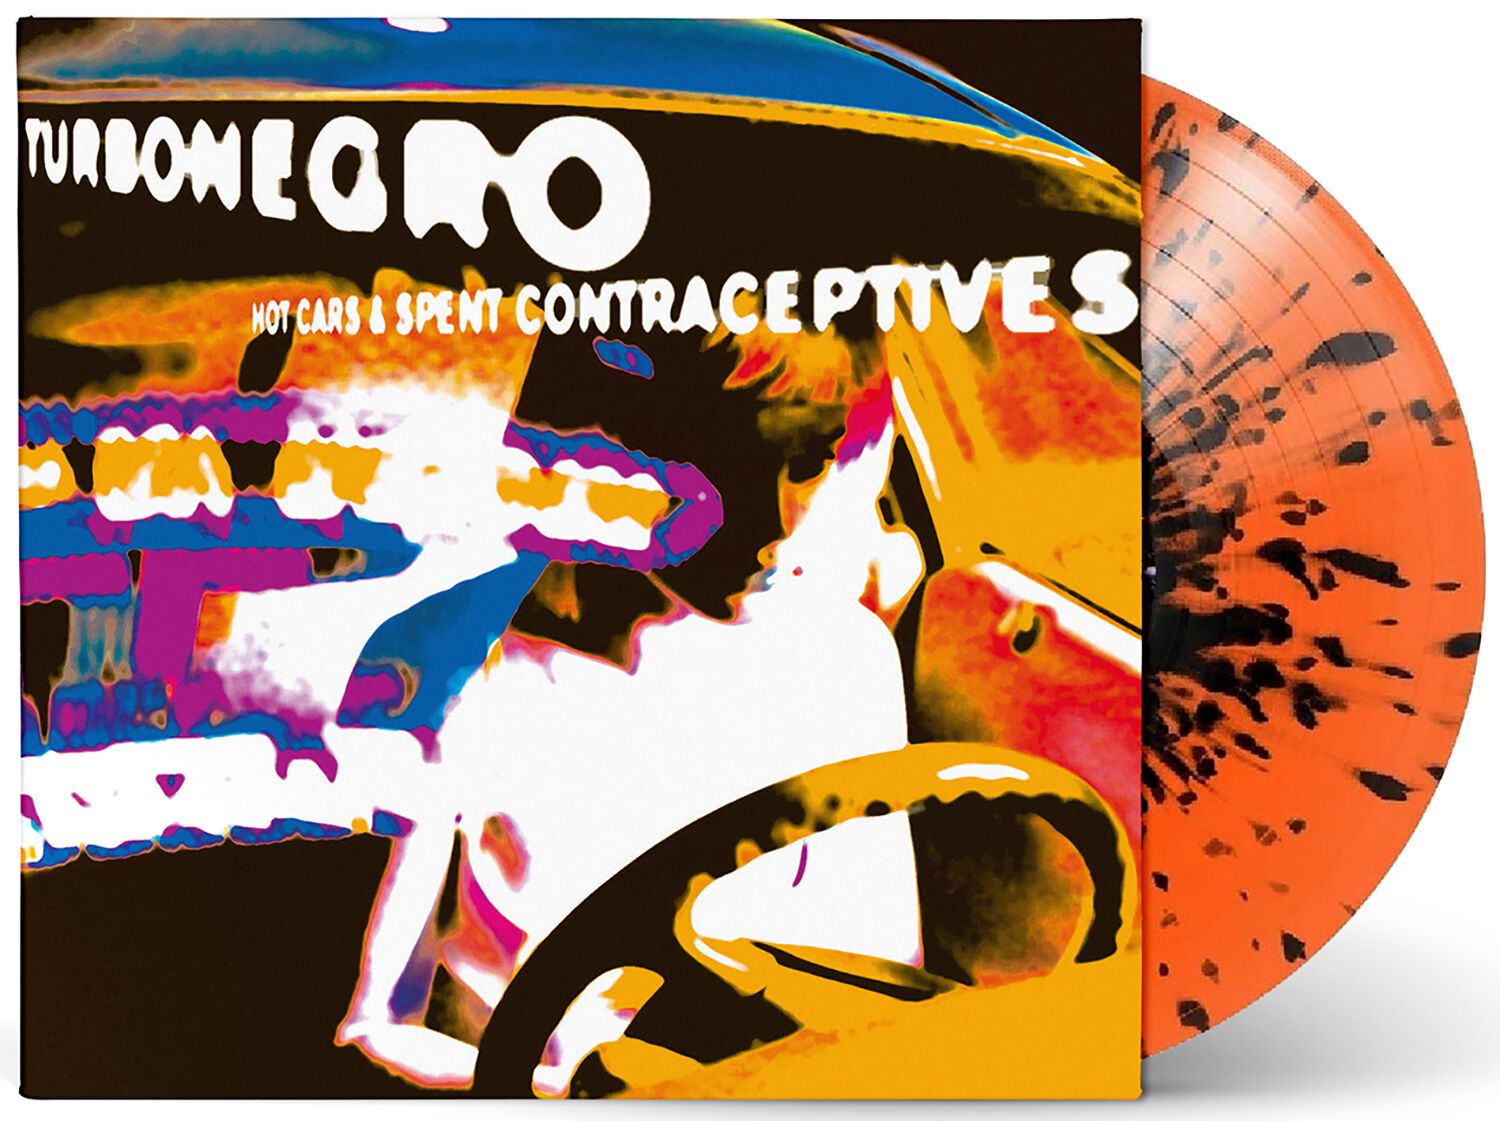 Image of Turbonegro Hot cars and spend contraceptives LP splattered